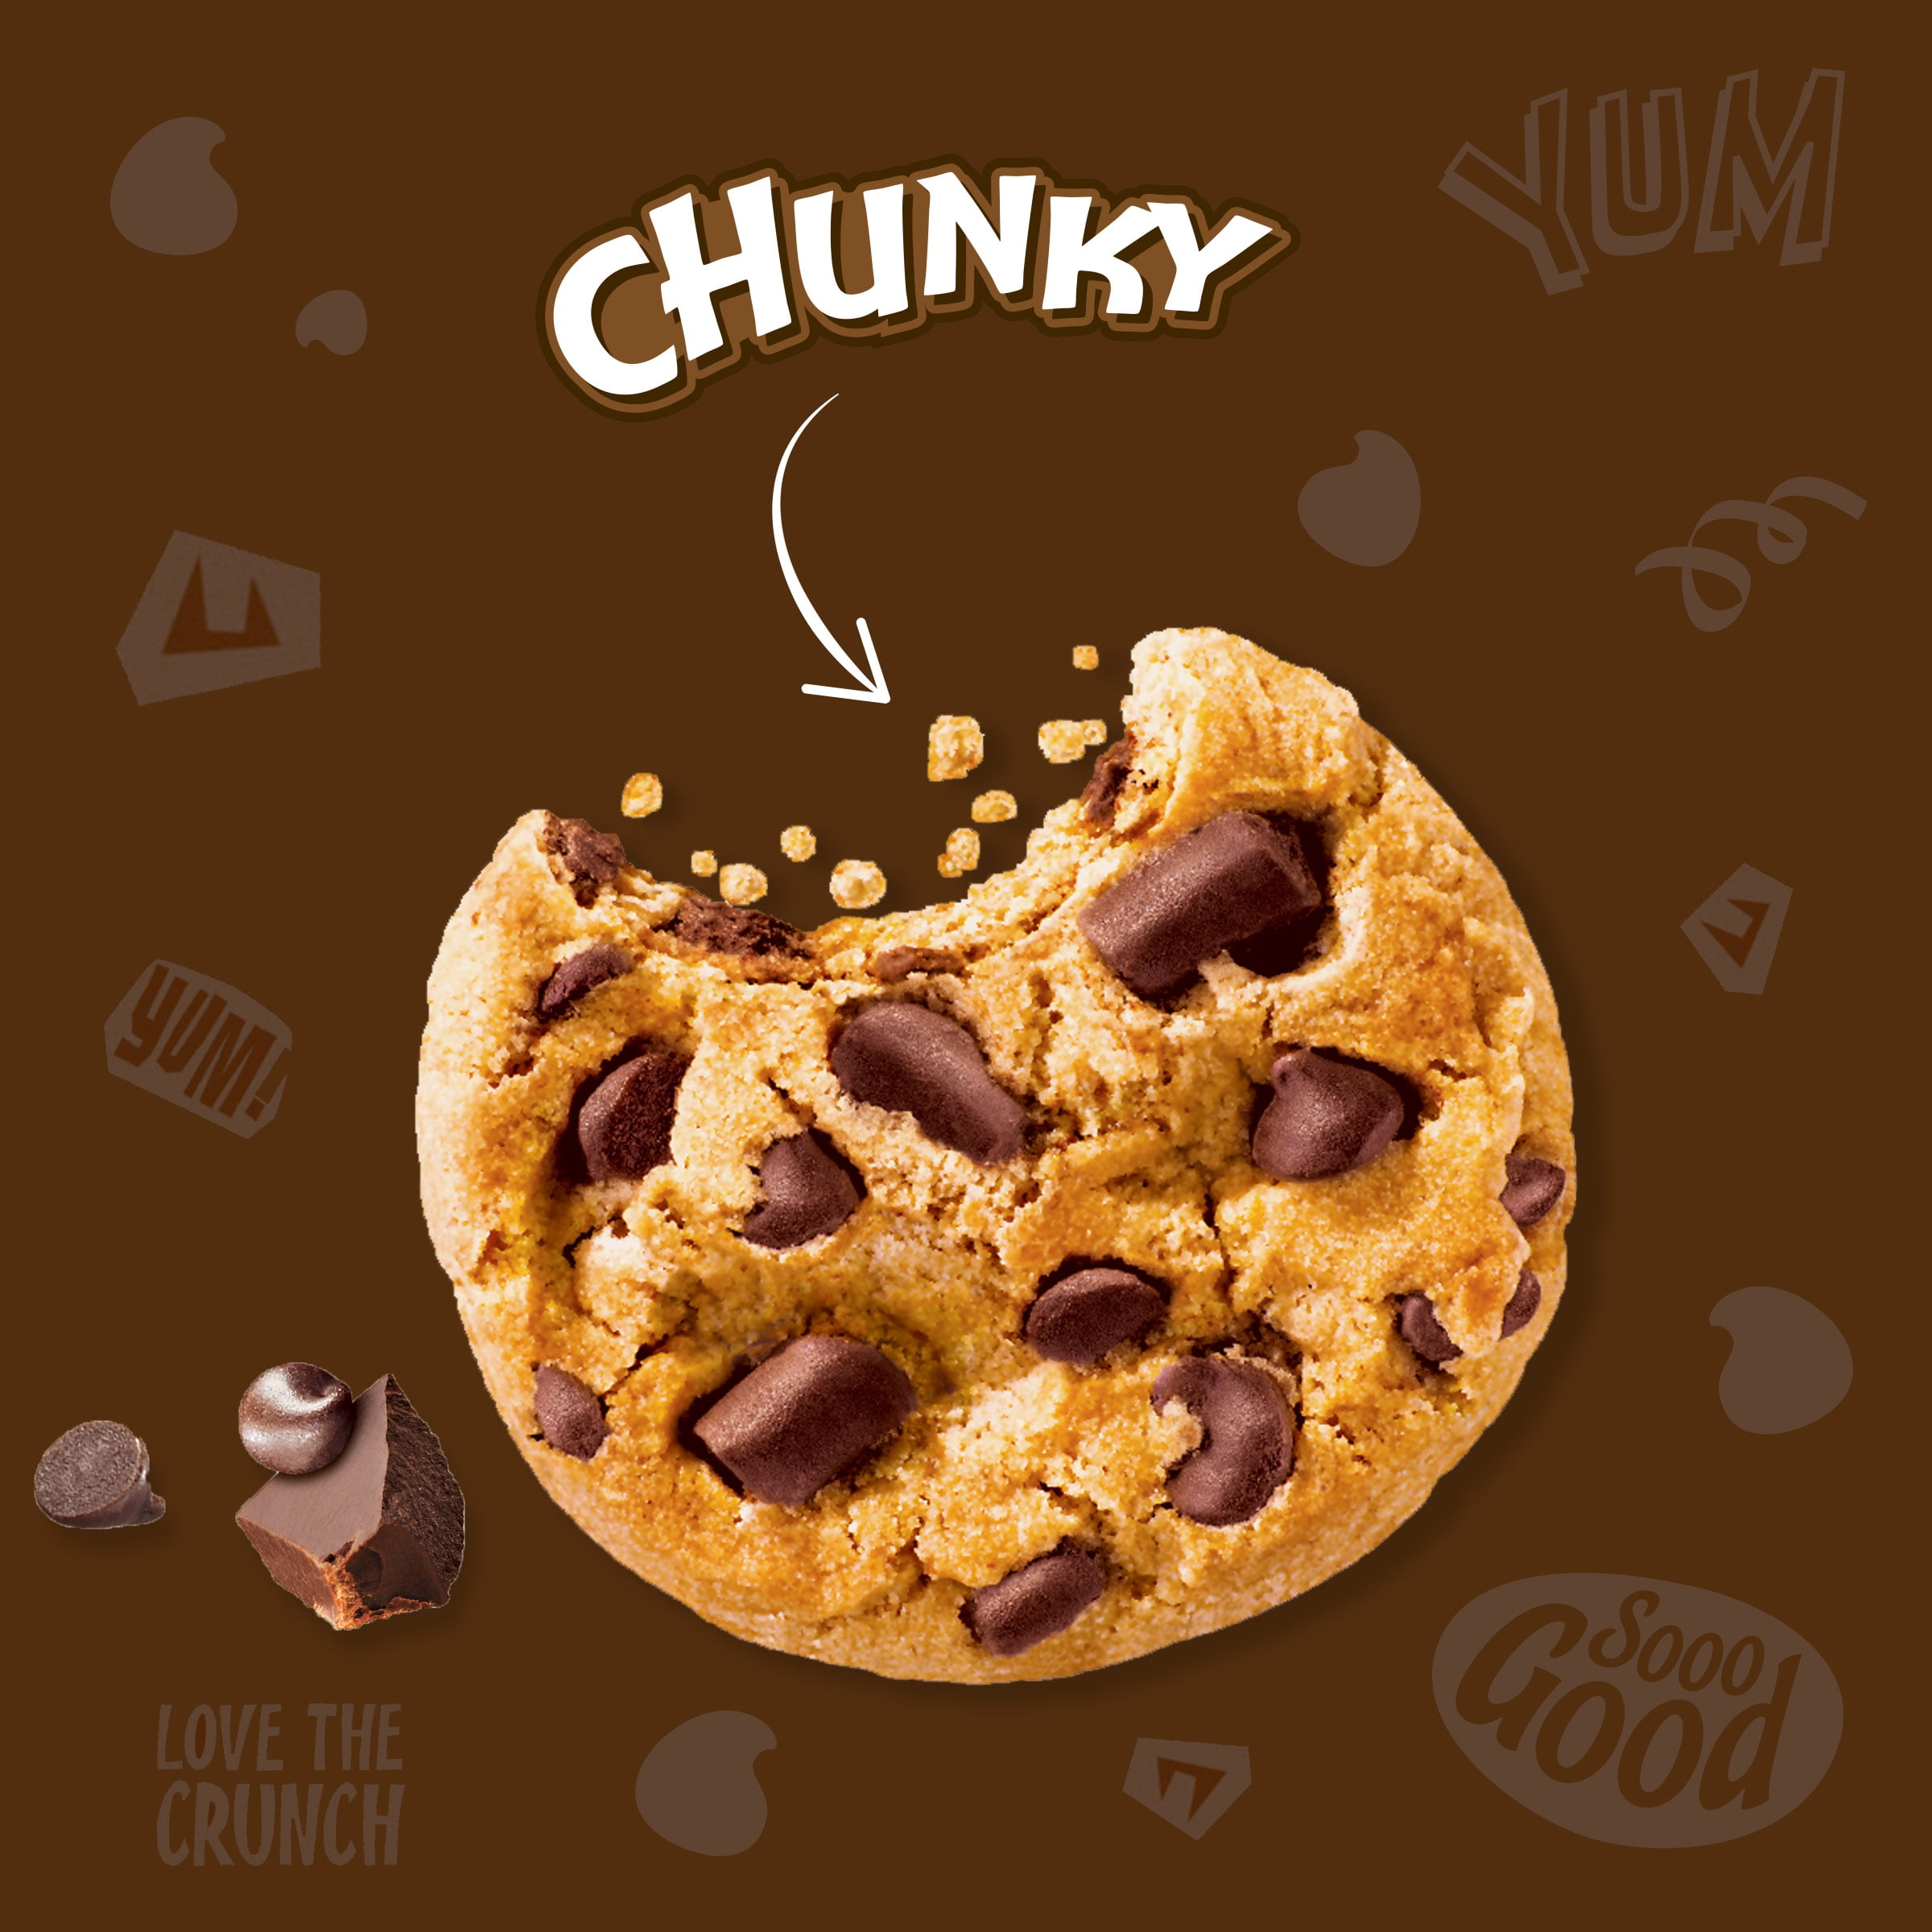 Chips Ahoy! Chunk Chocolate Chip Cookies, King Size, 4.15 Oz 